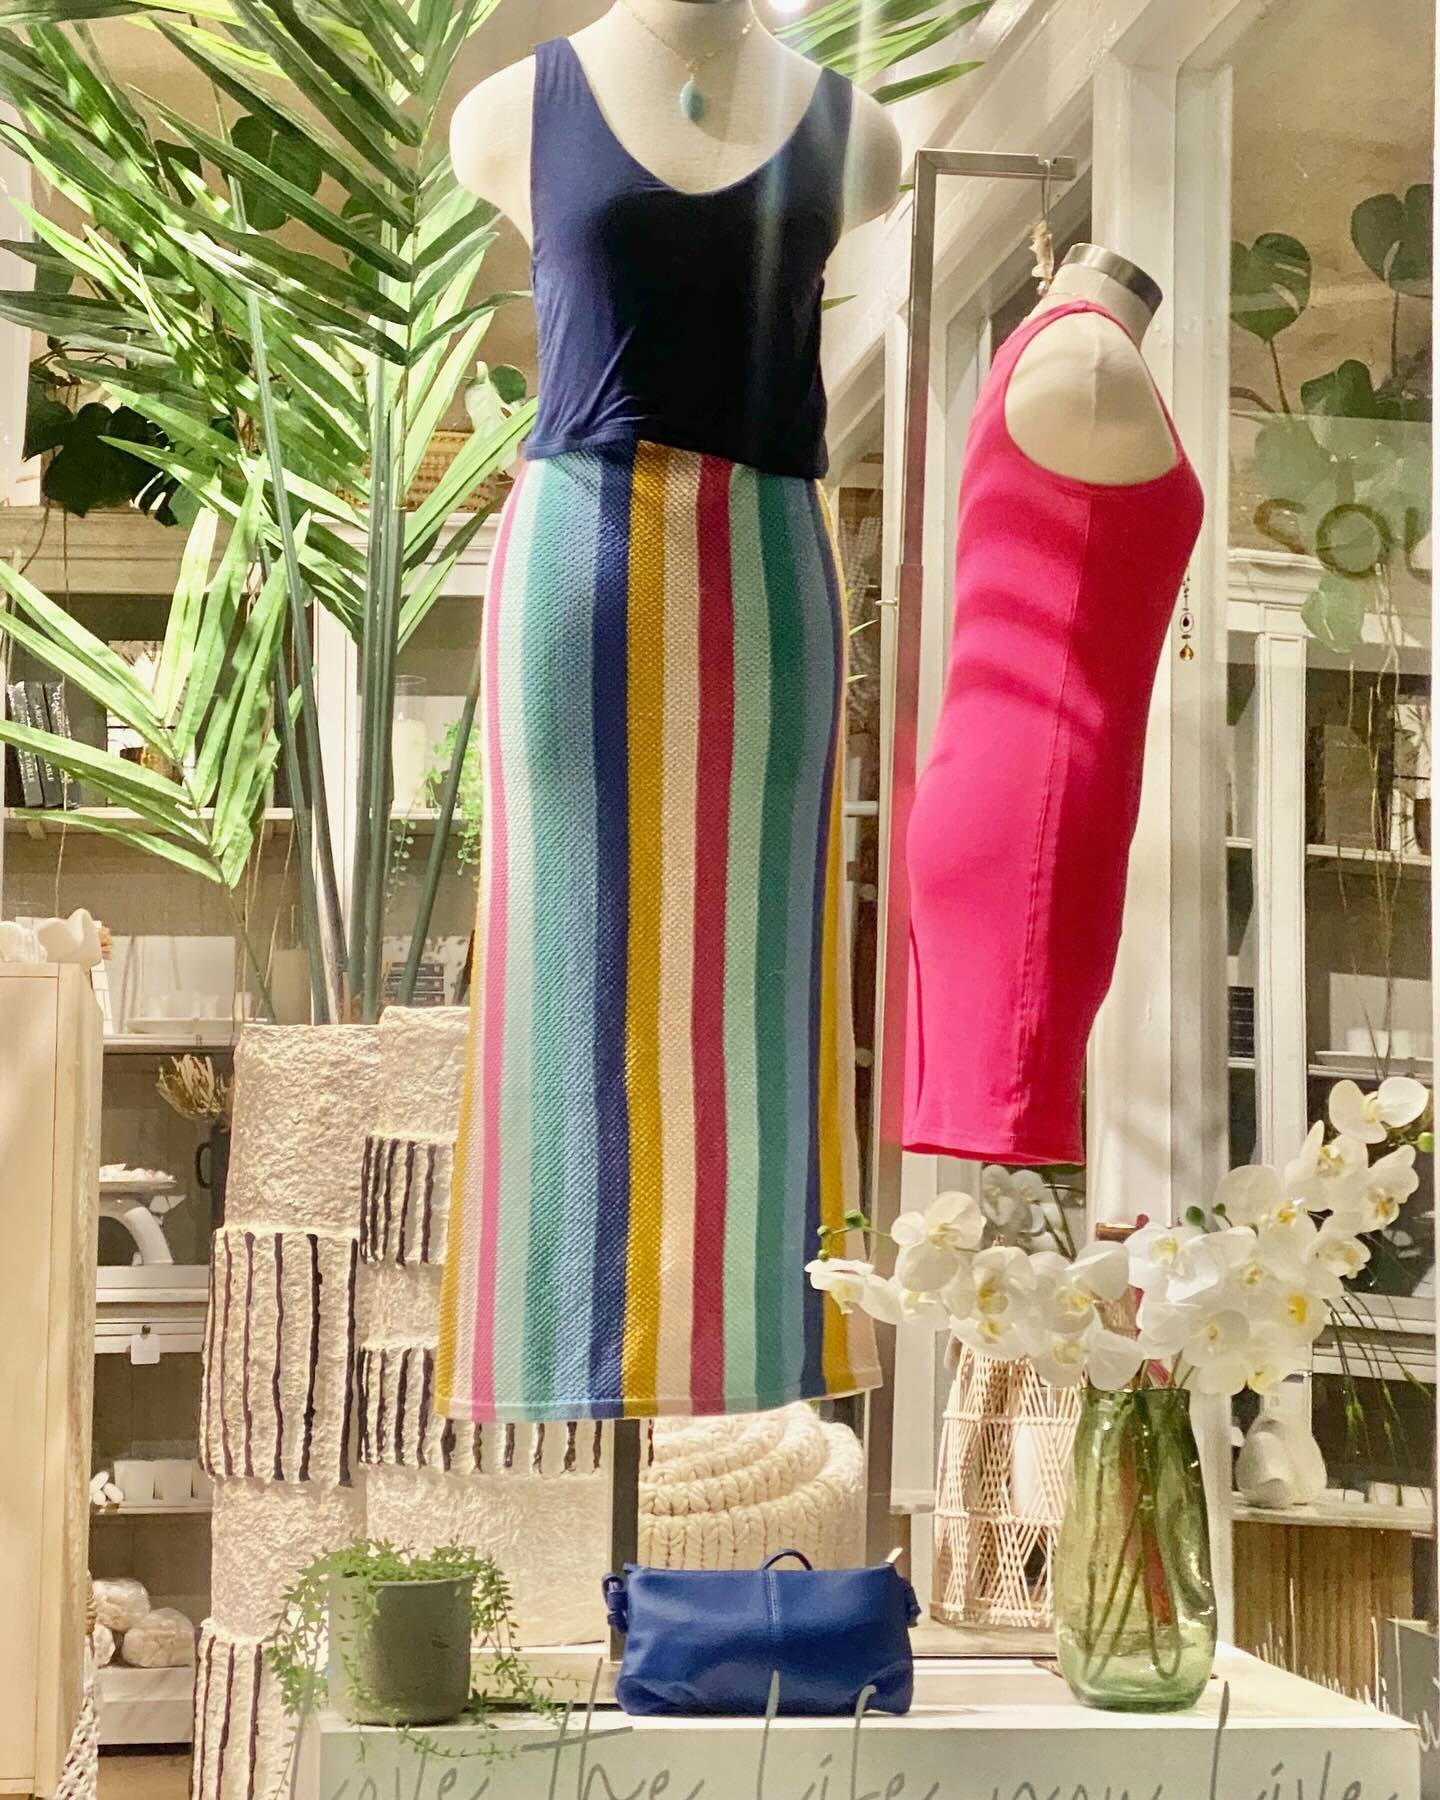 Summer vibes are in full swing! 🌴 Turn heads with our Cabana stripe maxi skirt - say hello to sunshine and style! ☀️ 

Tuesday-Saturday 10-6pm!
Sunday 12-5pm!
&bull;
&bull;
&bull;
&bull;
&bull;
&bull;
 #SummerStyle #IslandVibes #islandlife #soulhous